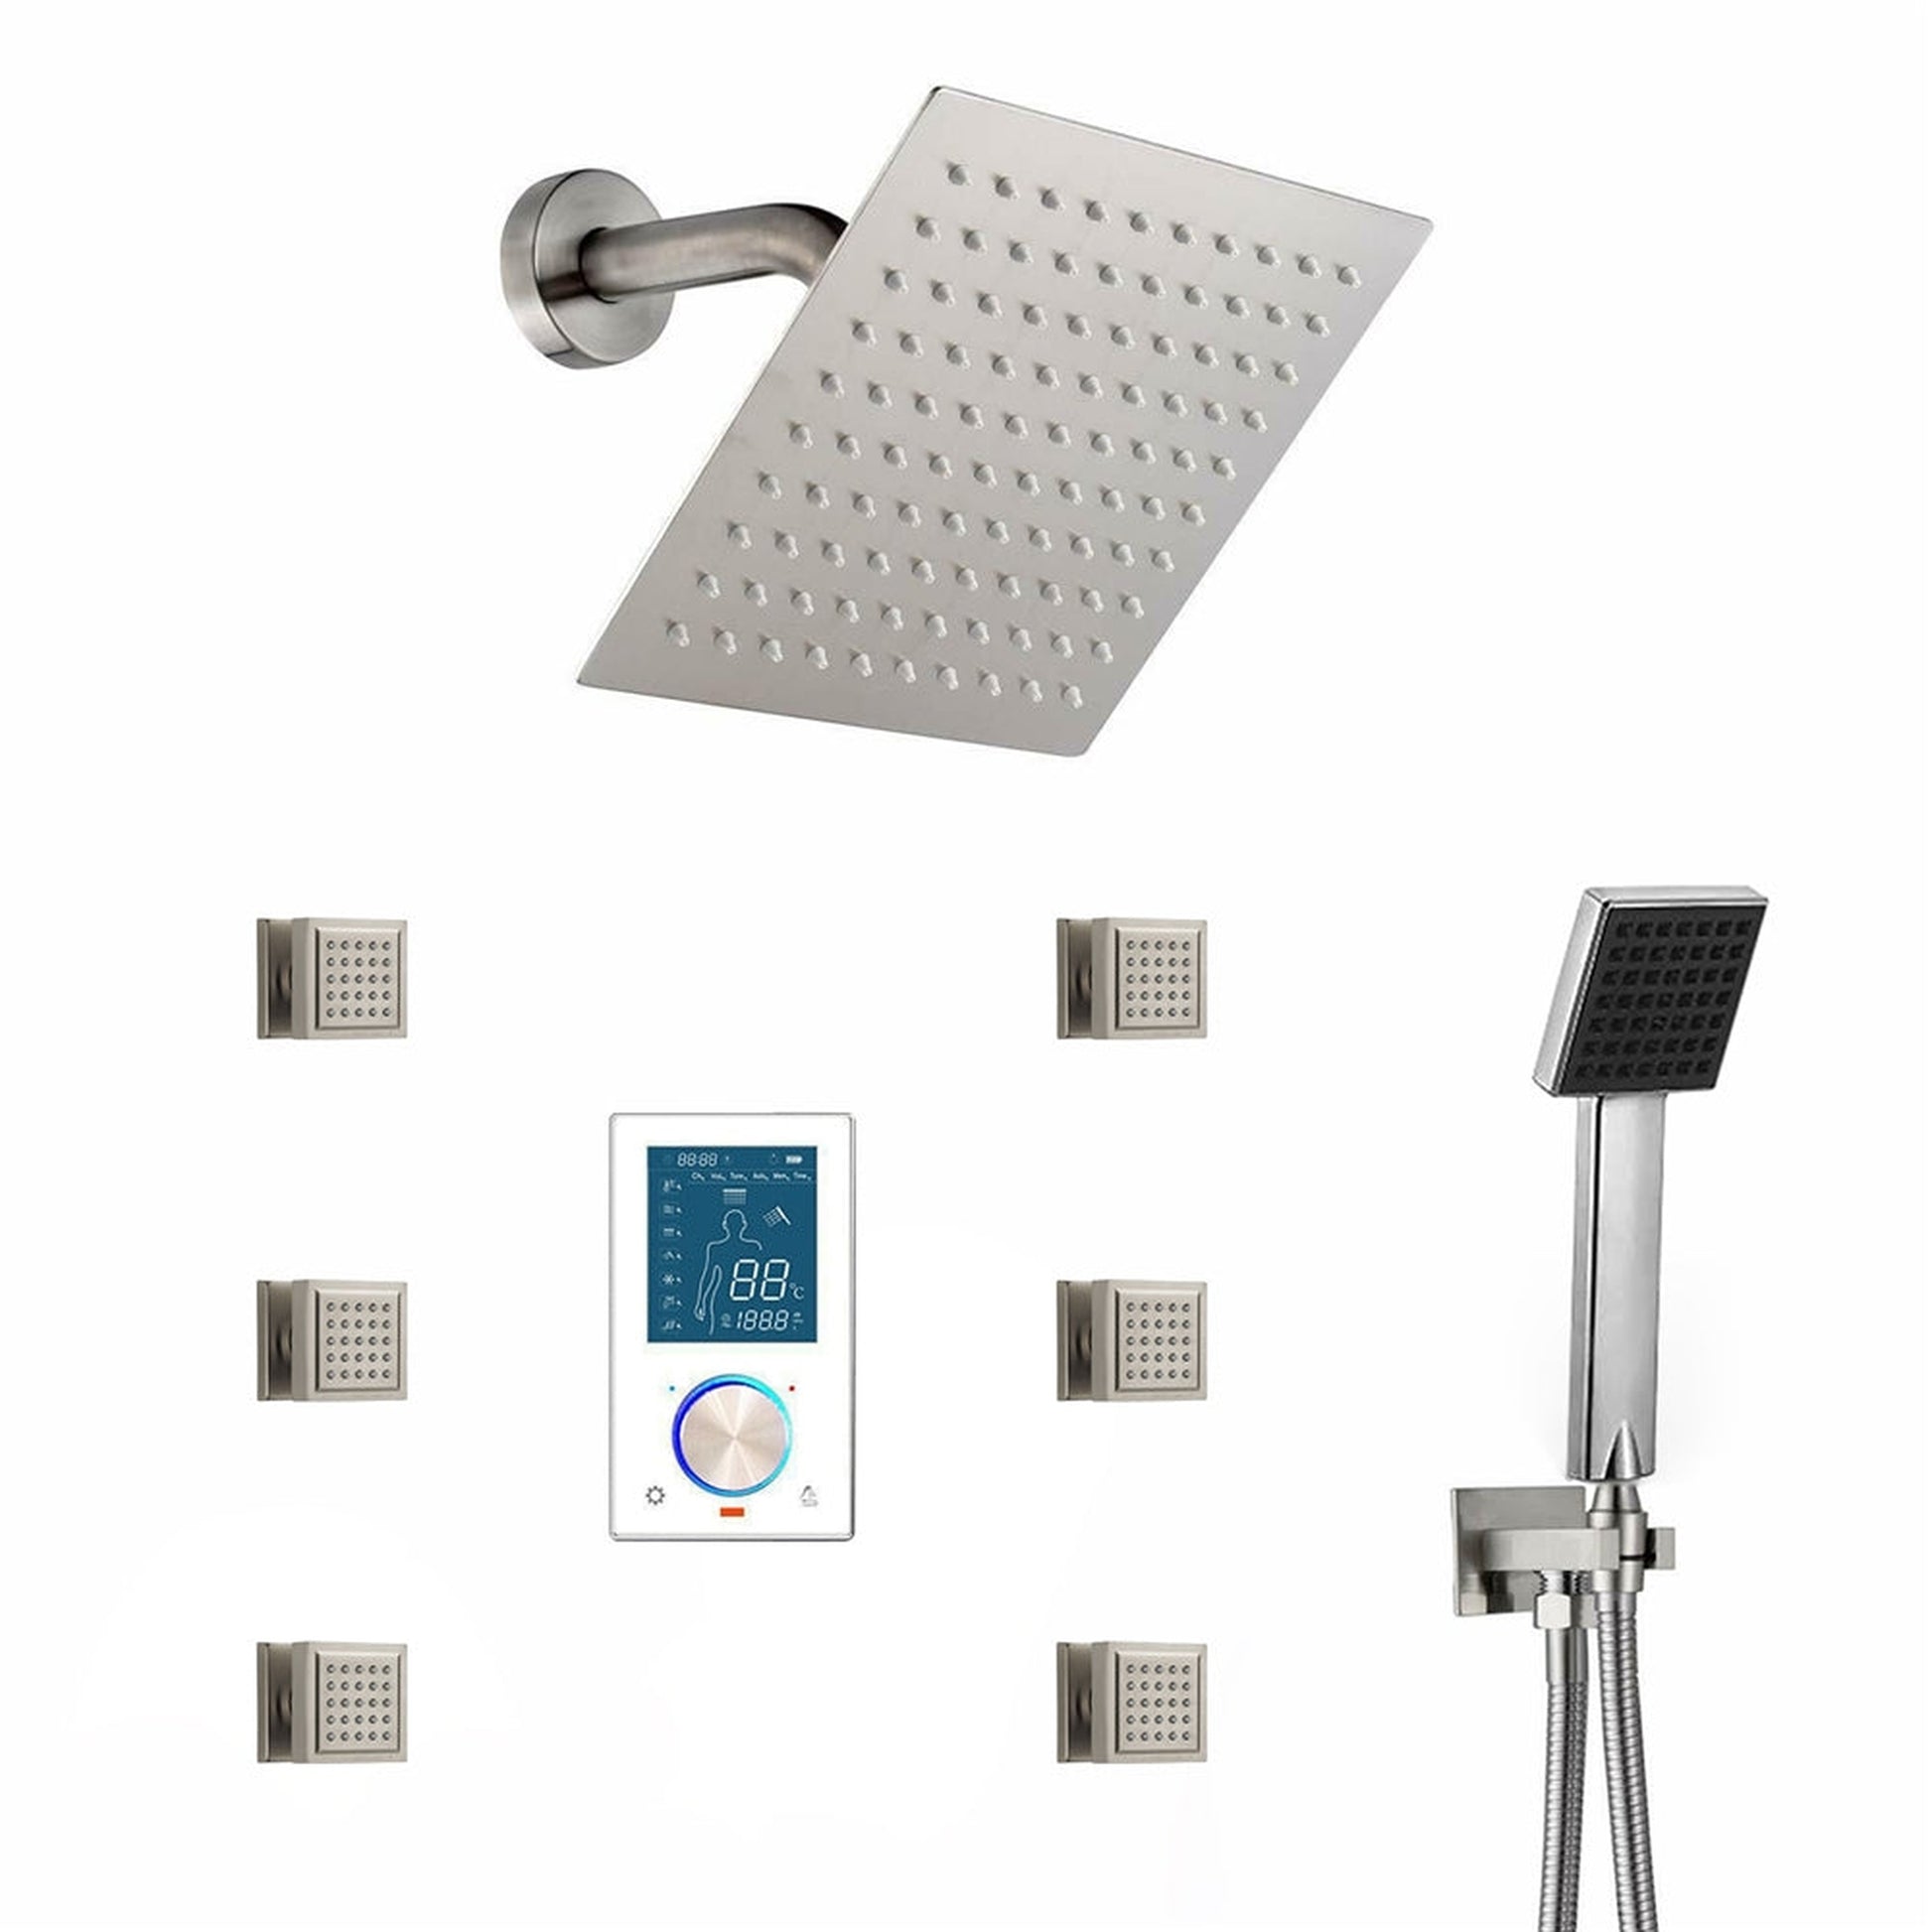 Fontana 8" Brushed Nickel Wall-Mounted Digital Temperature Controller Shower System With Hand Shower and 6-Jet Body Sprays